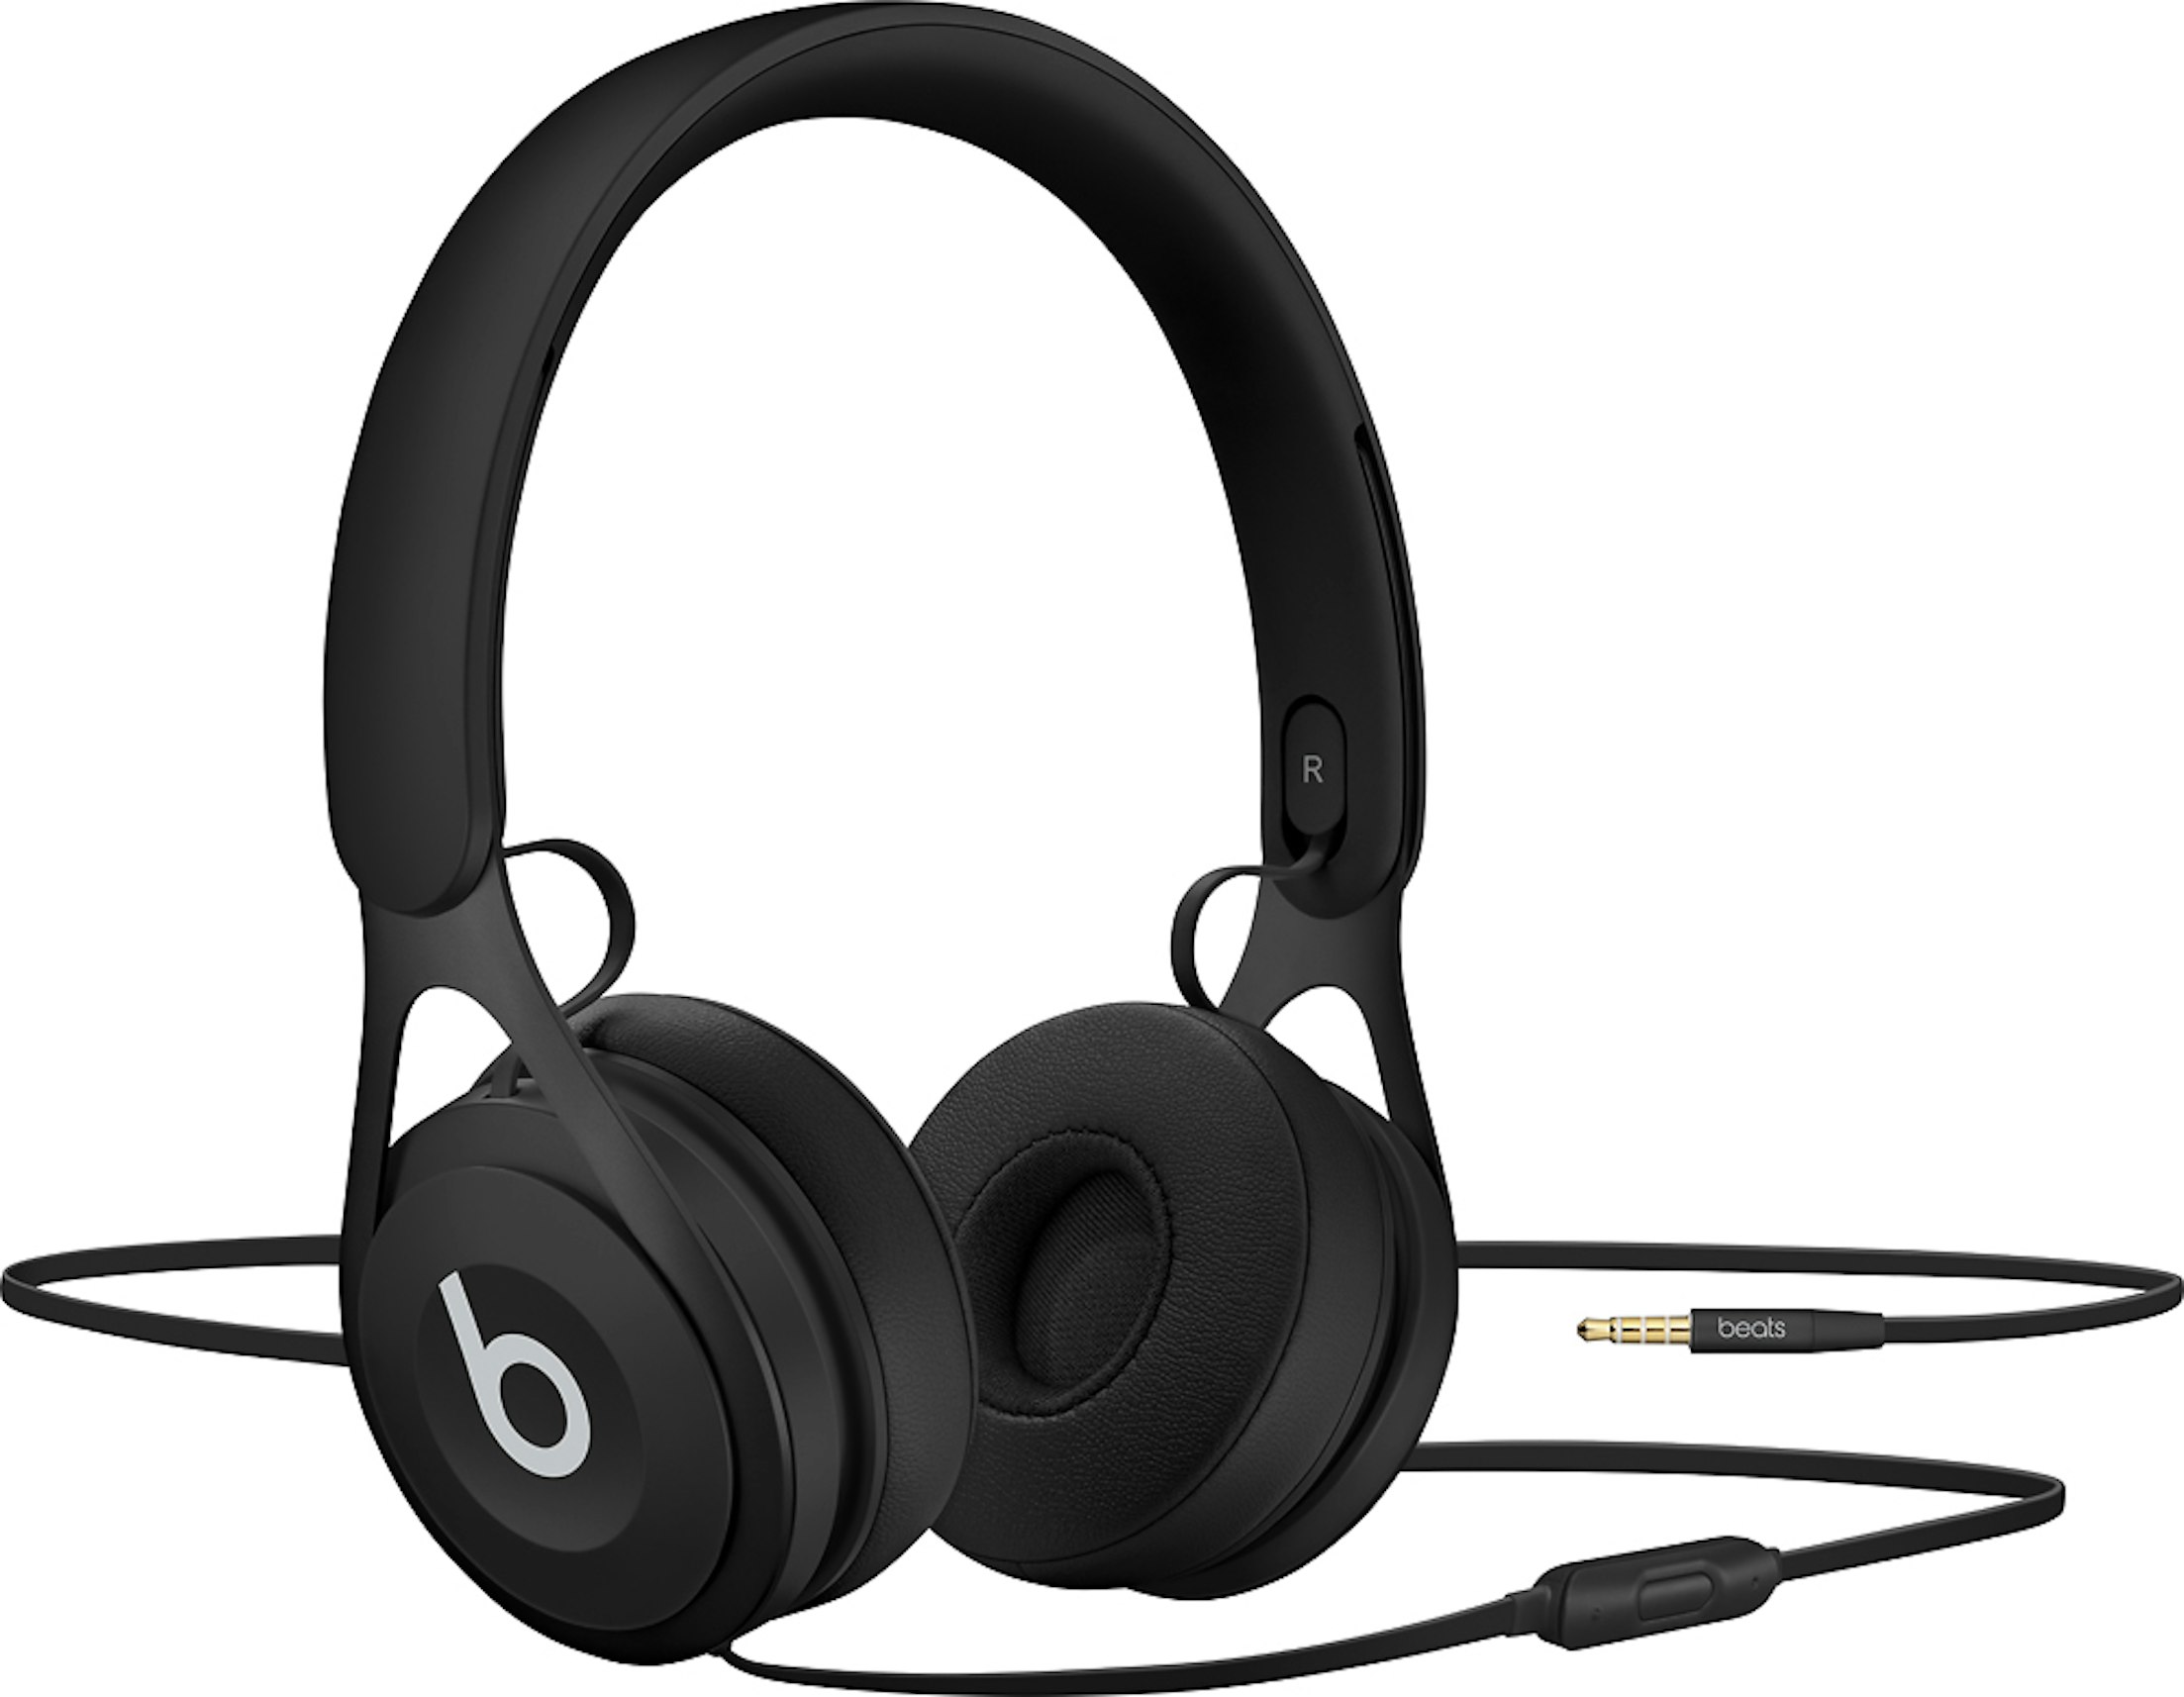 Indirekte straf acceptere Beats by Dr. Dre EP Headphones ML992LL/A Black - US